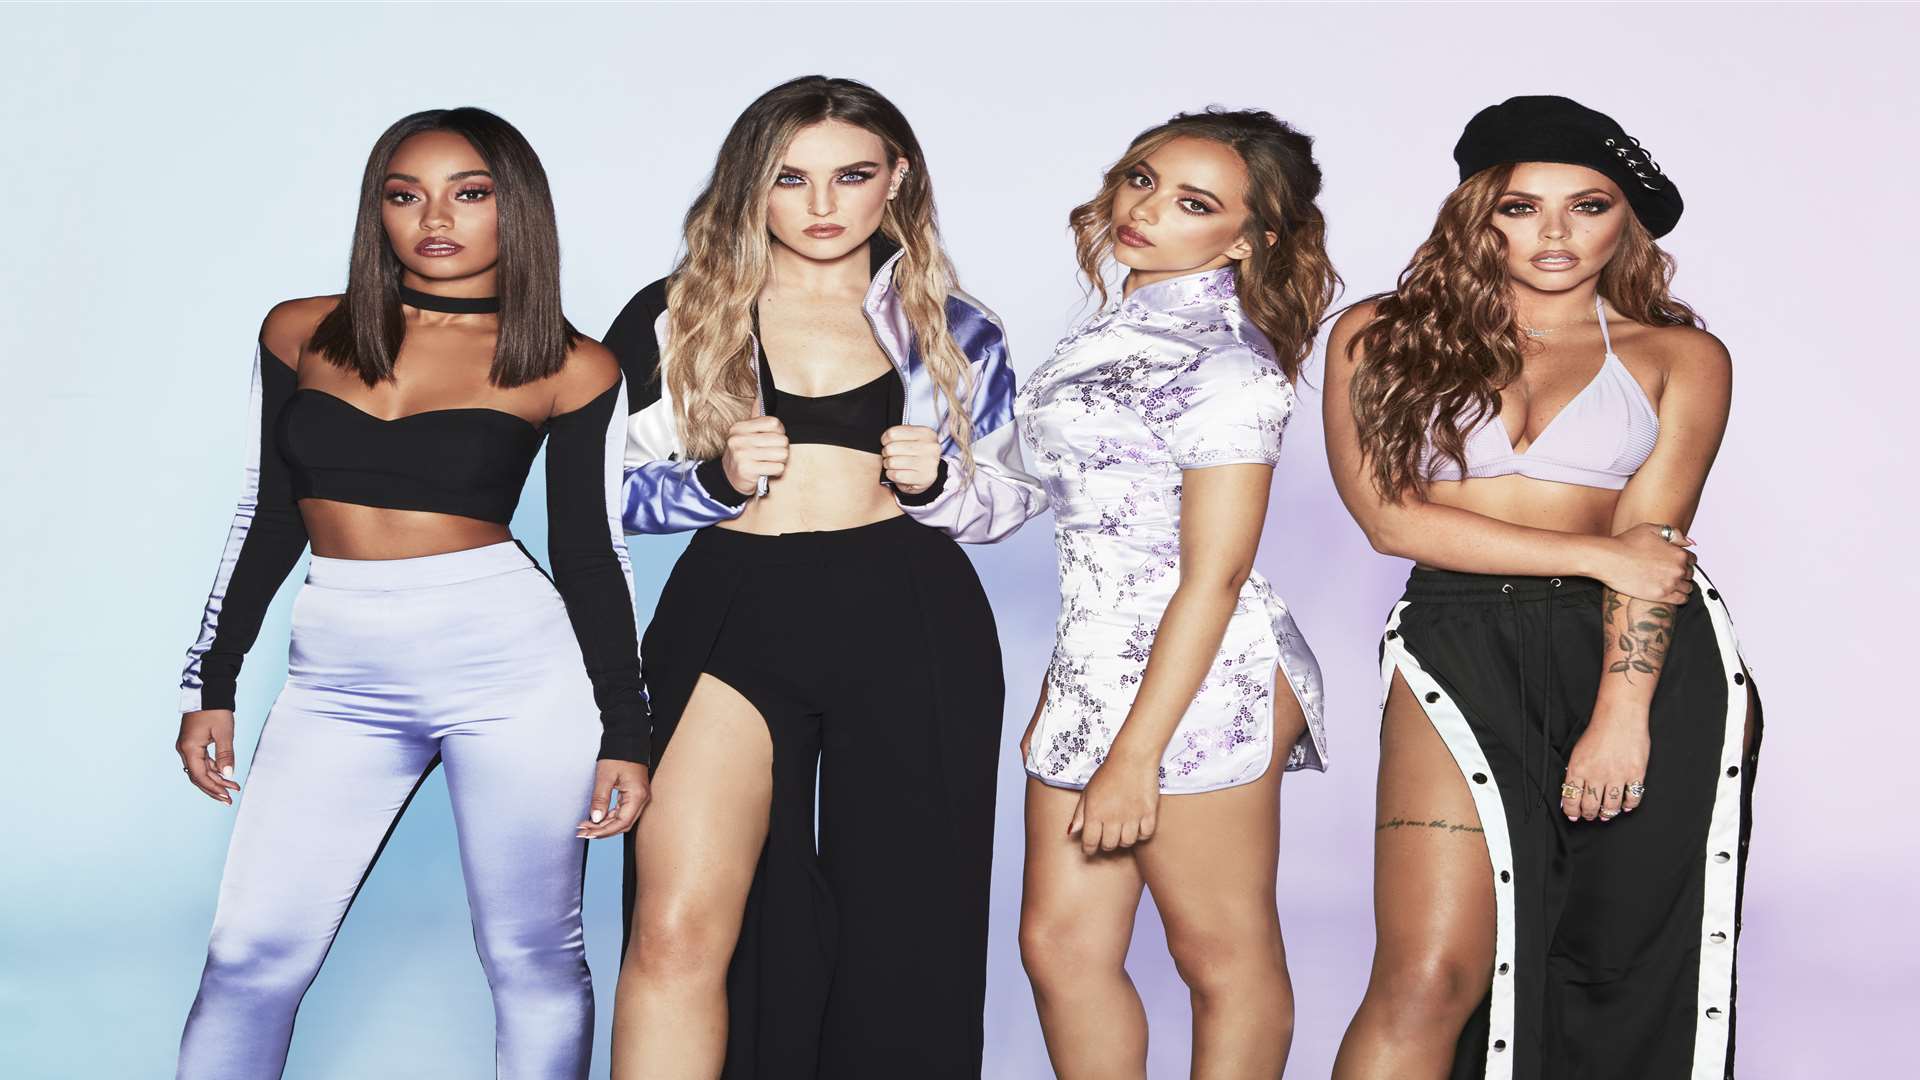 Little Mix will play the Kent Event Centre near Maidstone